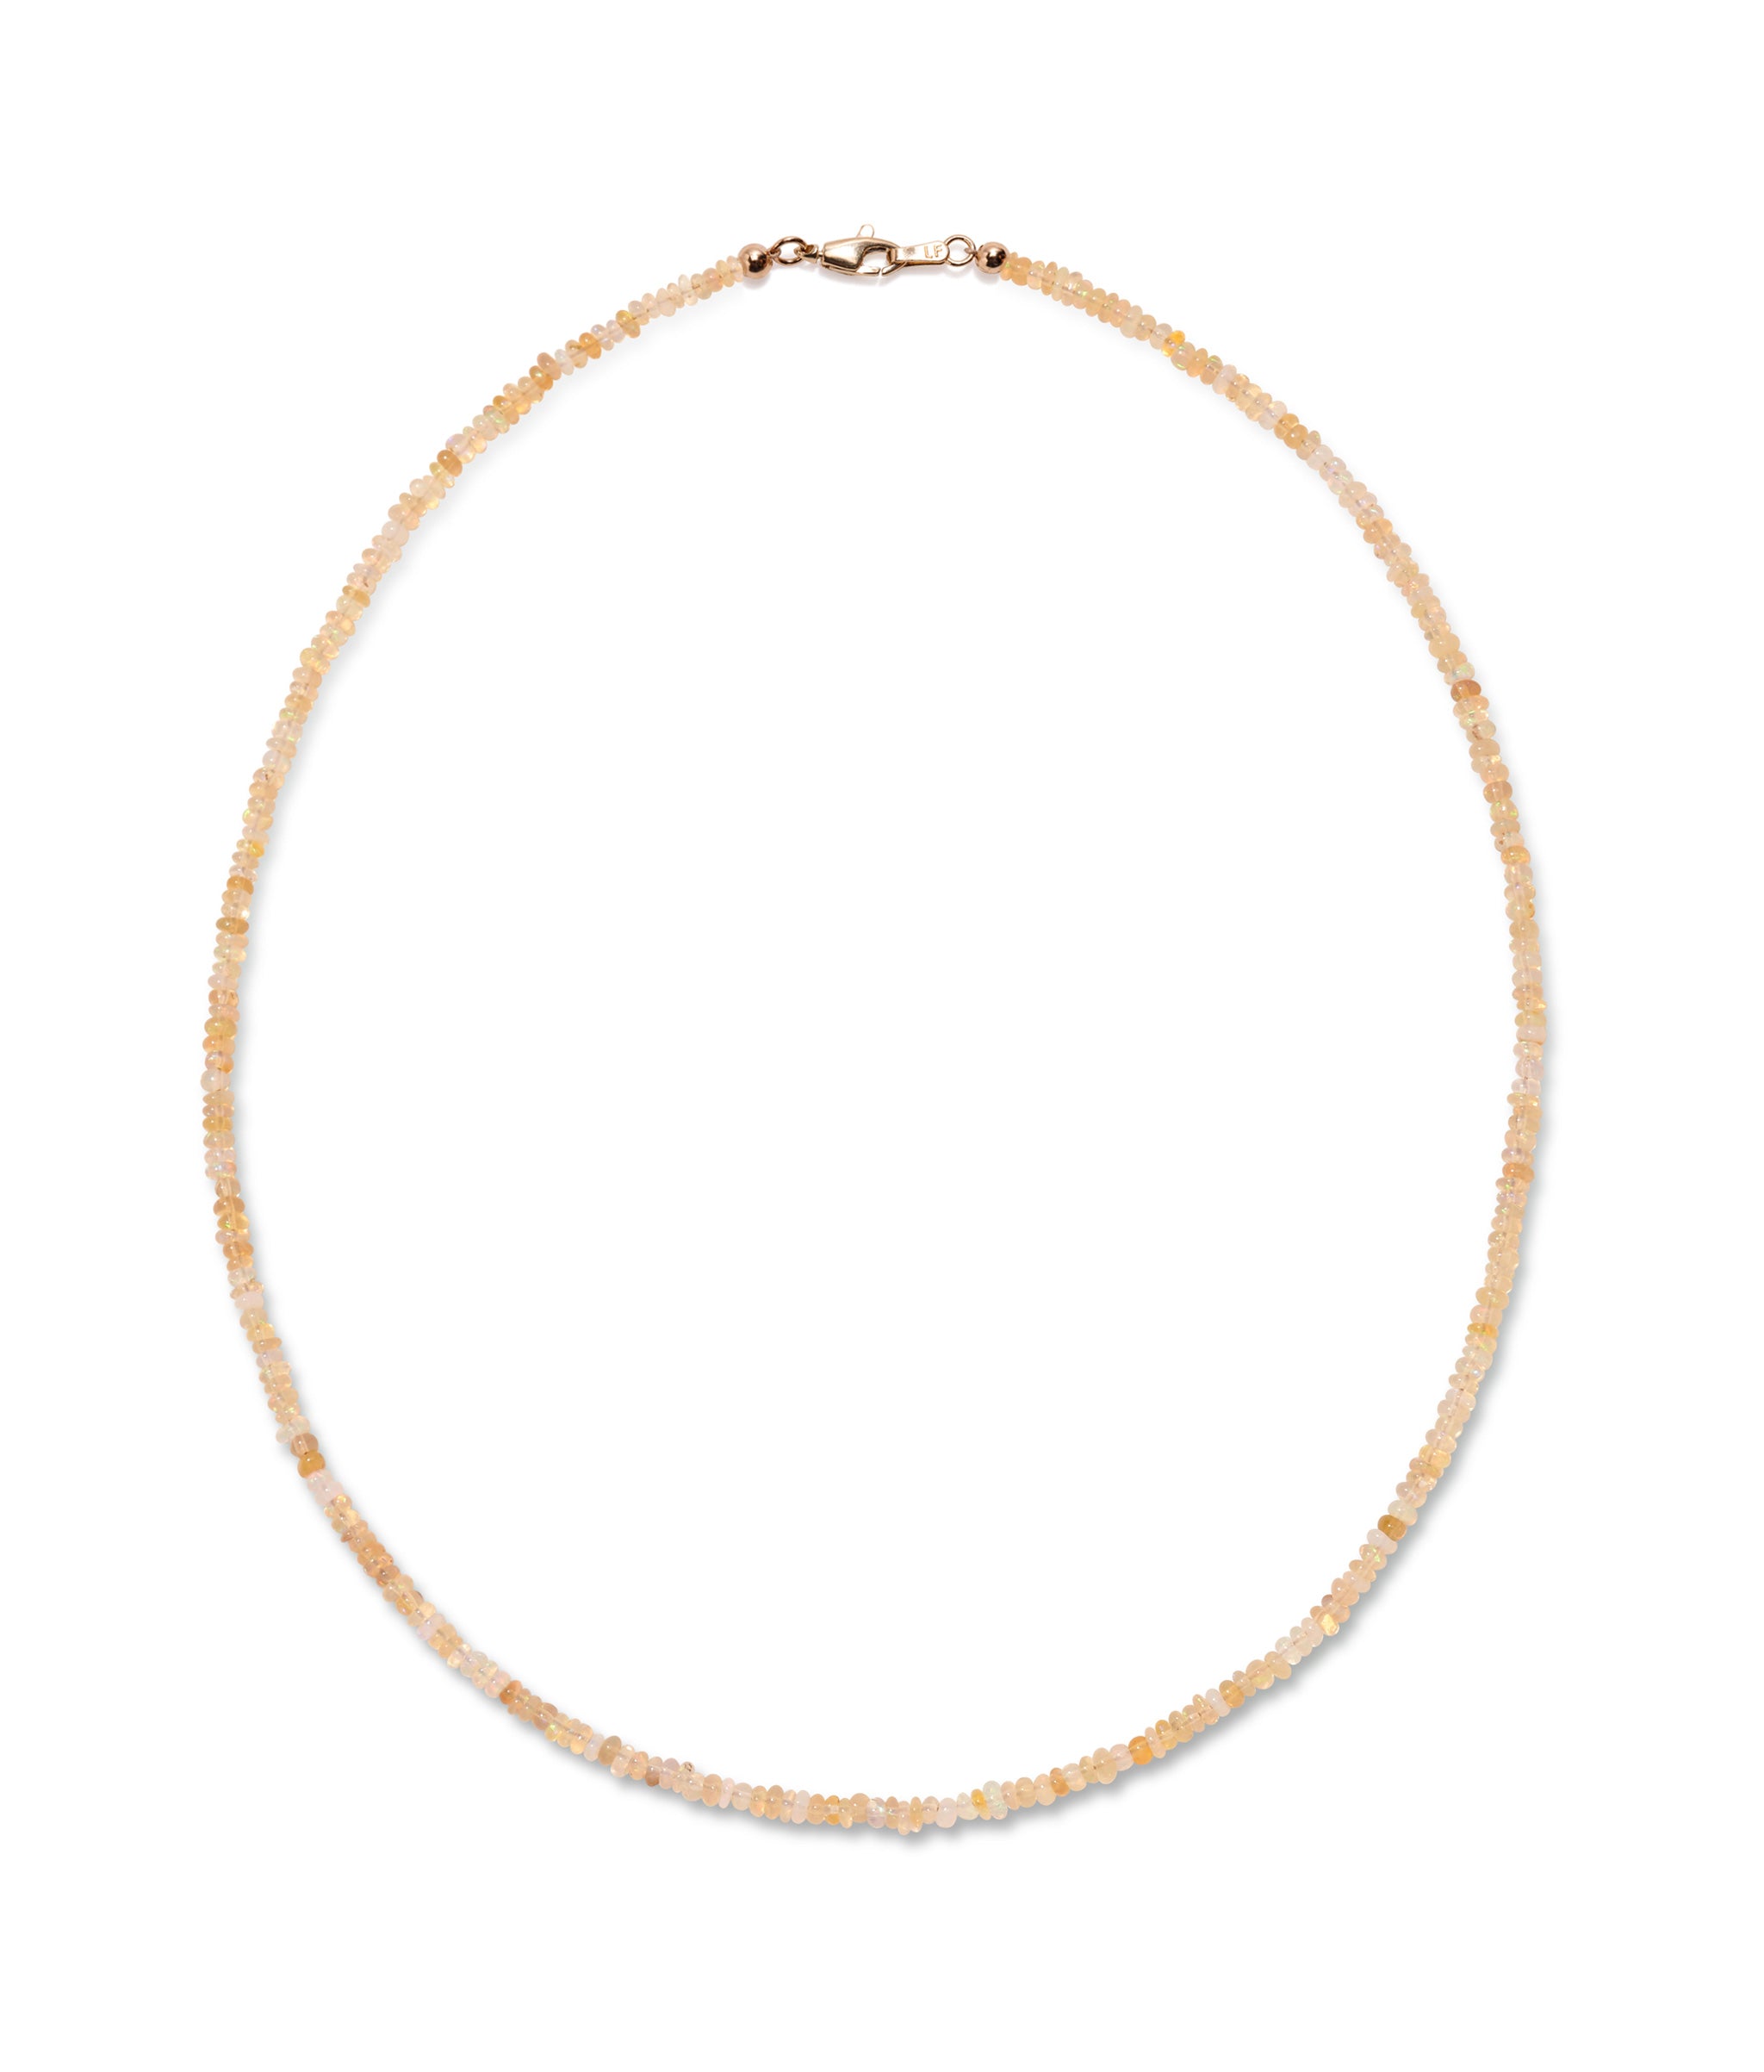 Tiny Opal & 14k Gold Necklace. Tiny faceted milky white-yellow opal bead necklace with gold lobster closure